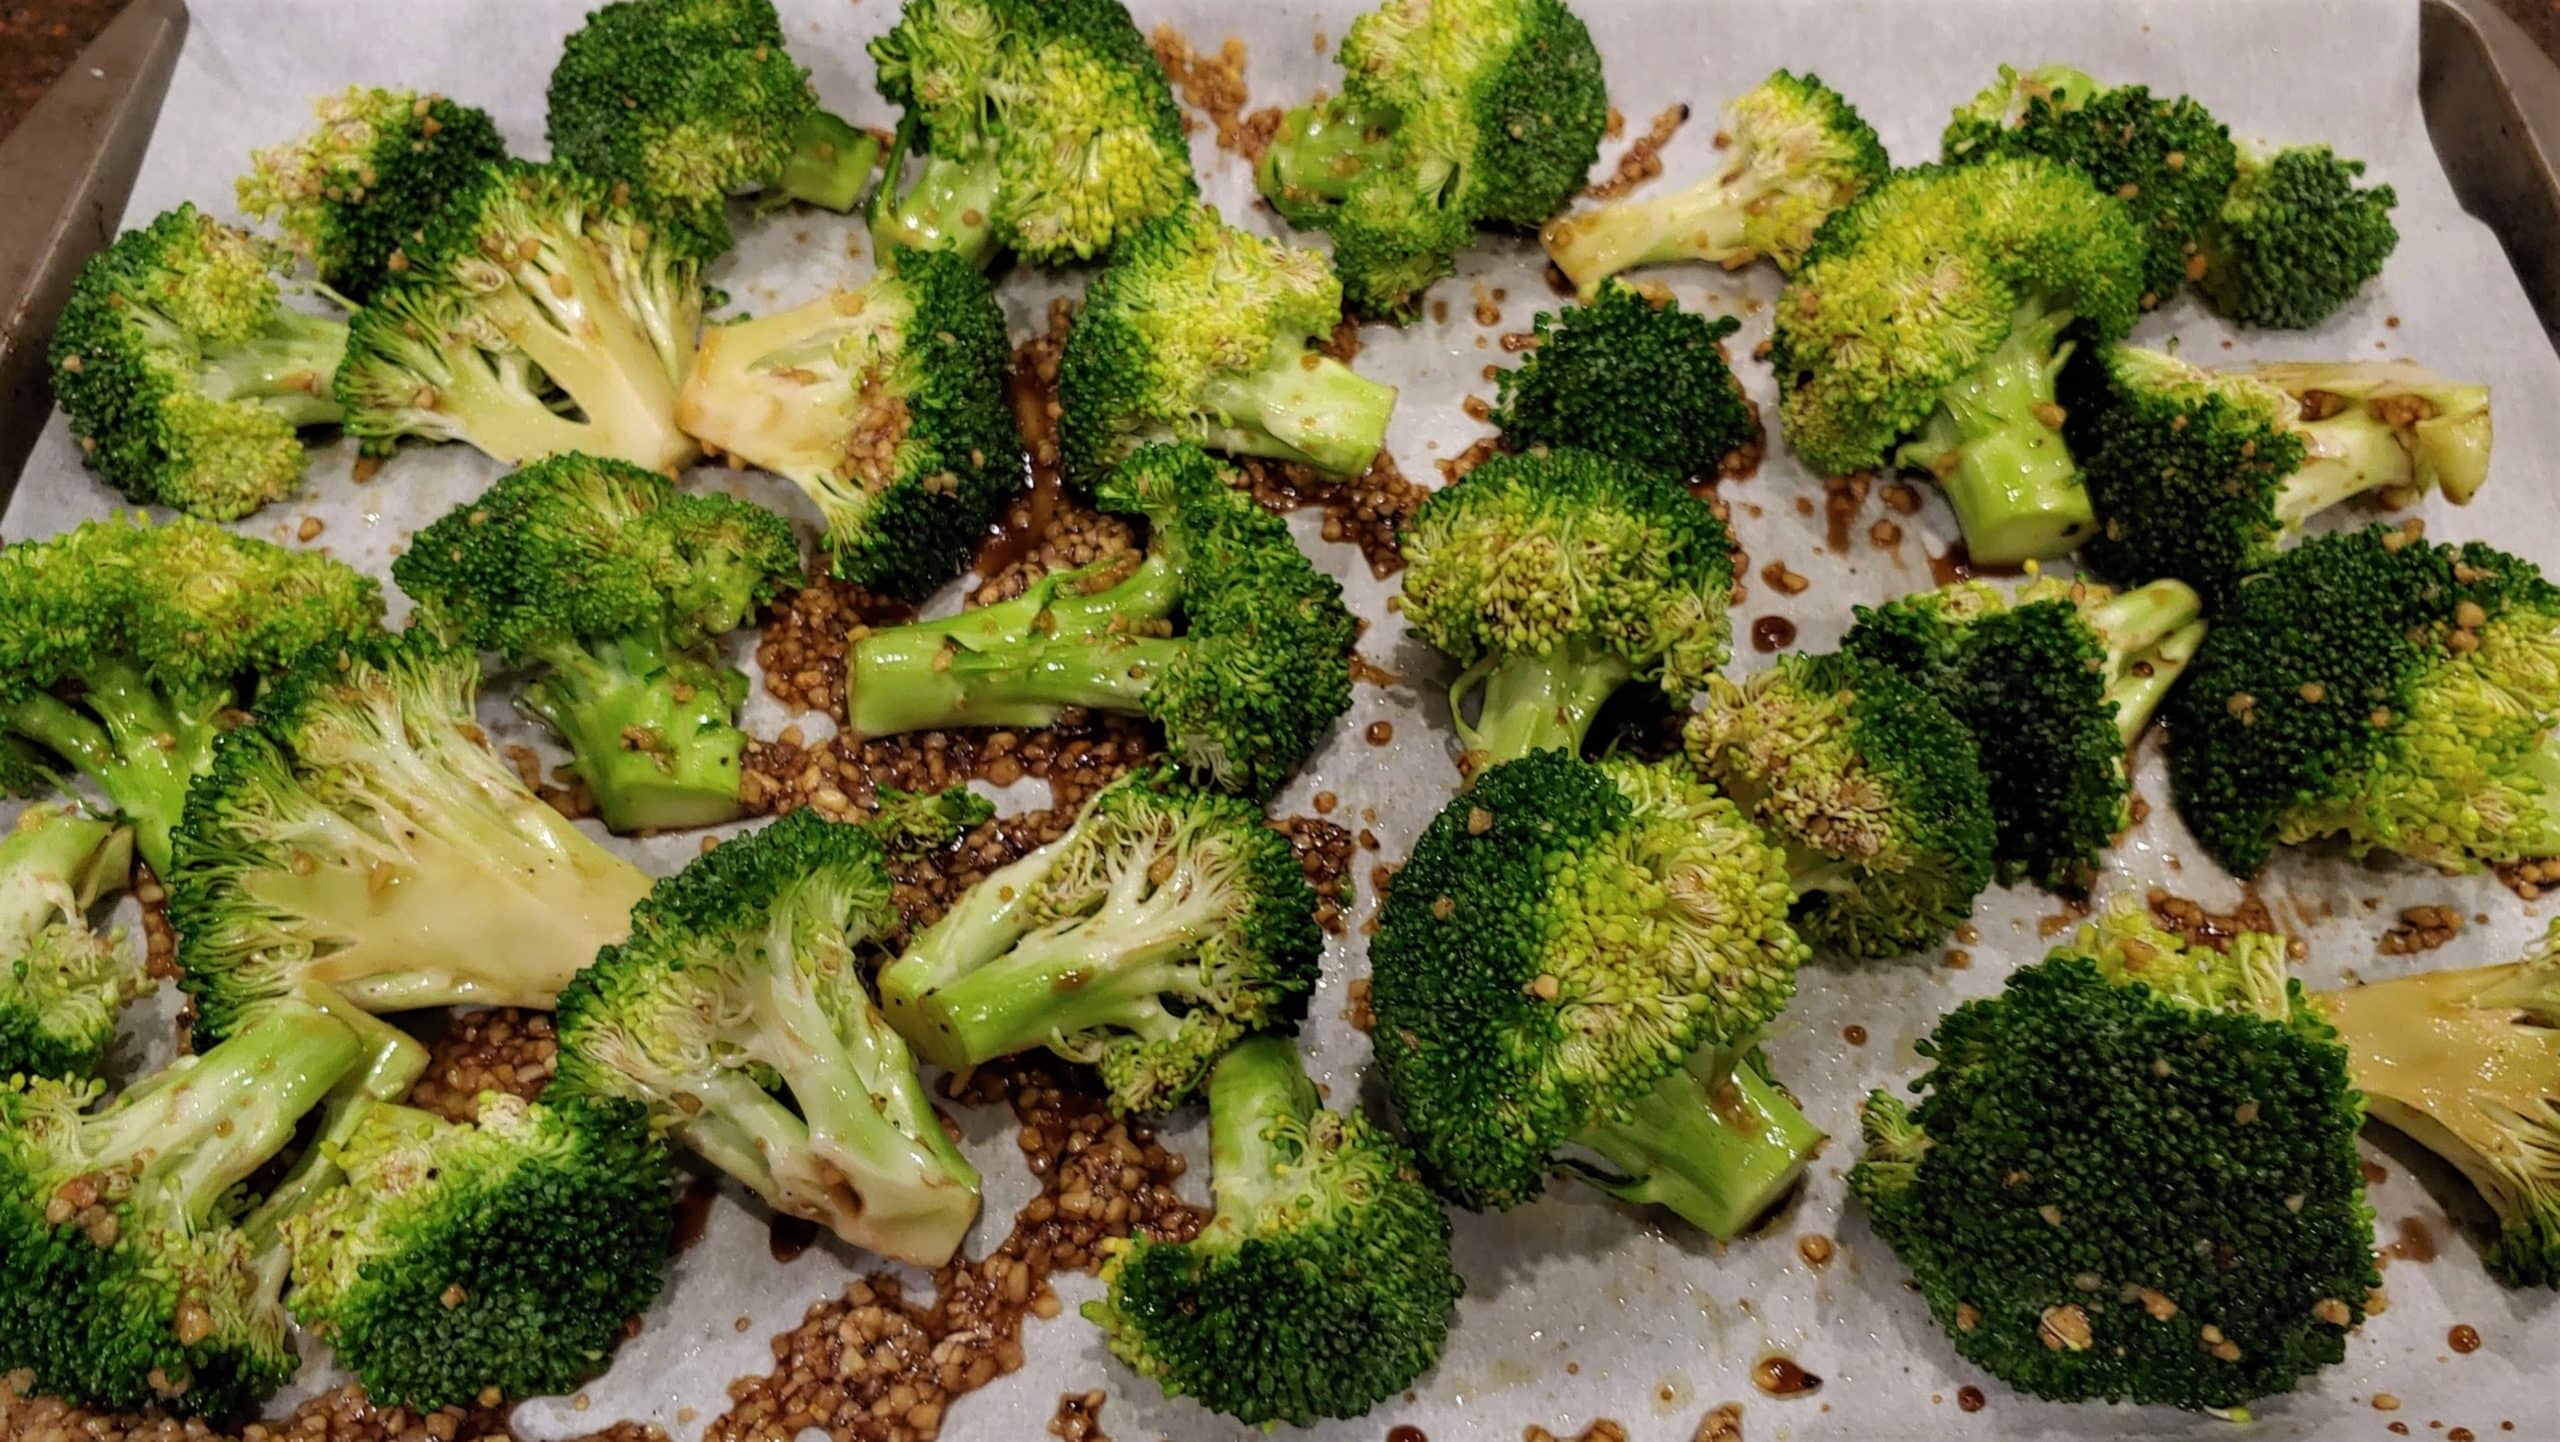 Roasted Broccoli with Balsamic Vinegar and Garlic - Dining in with Danielle